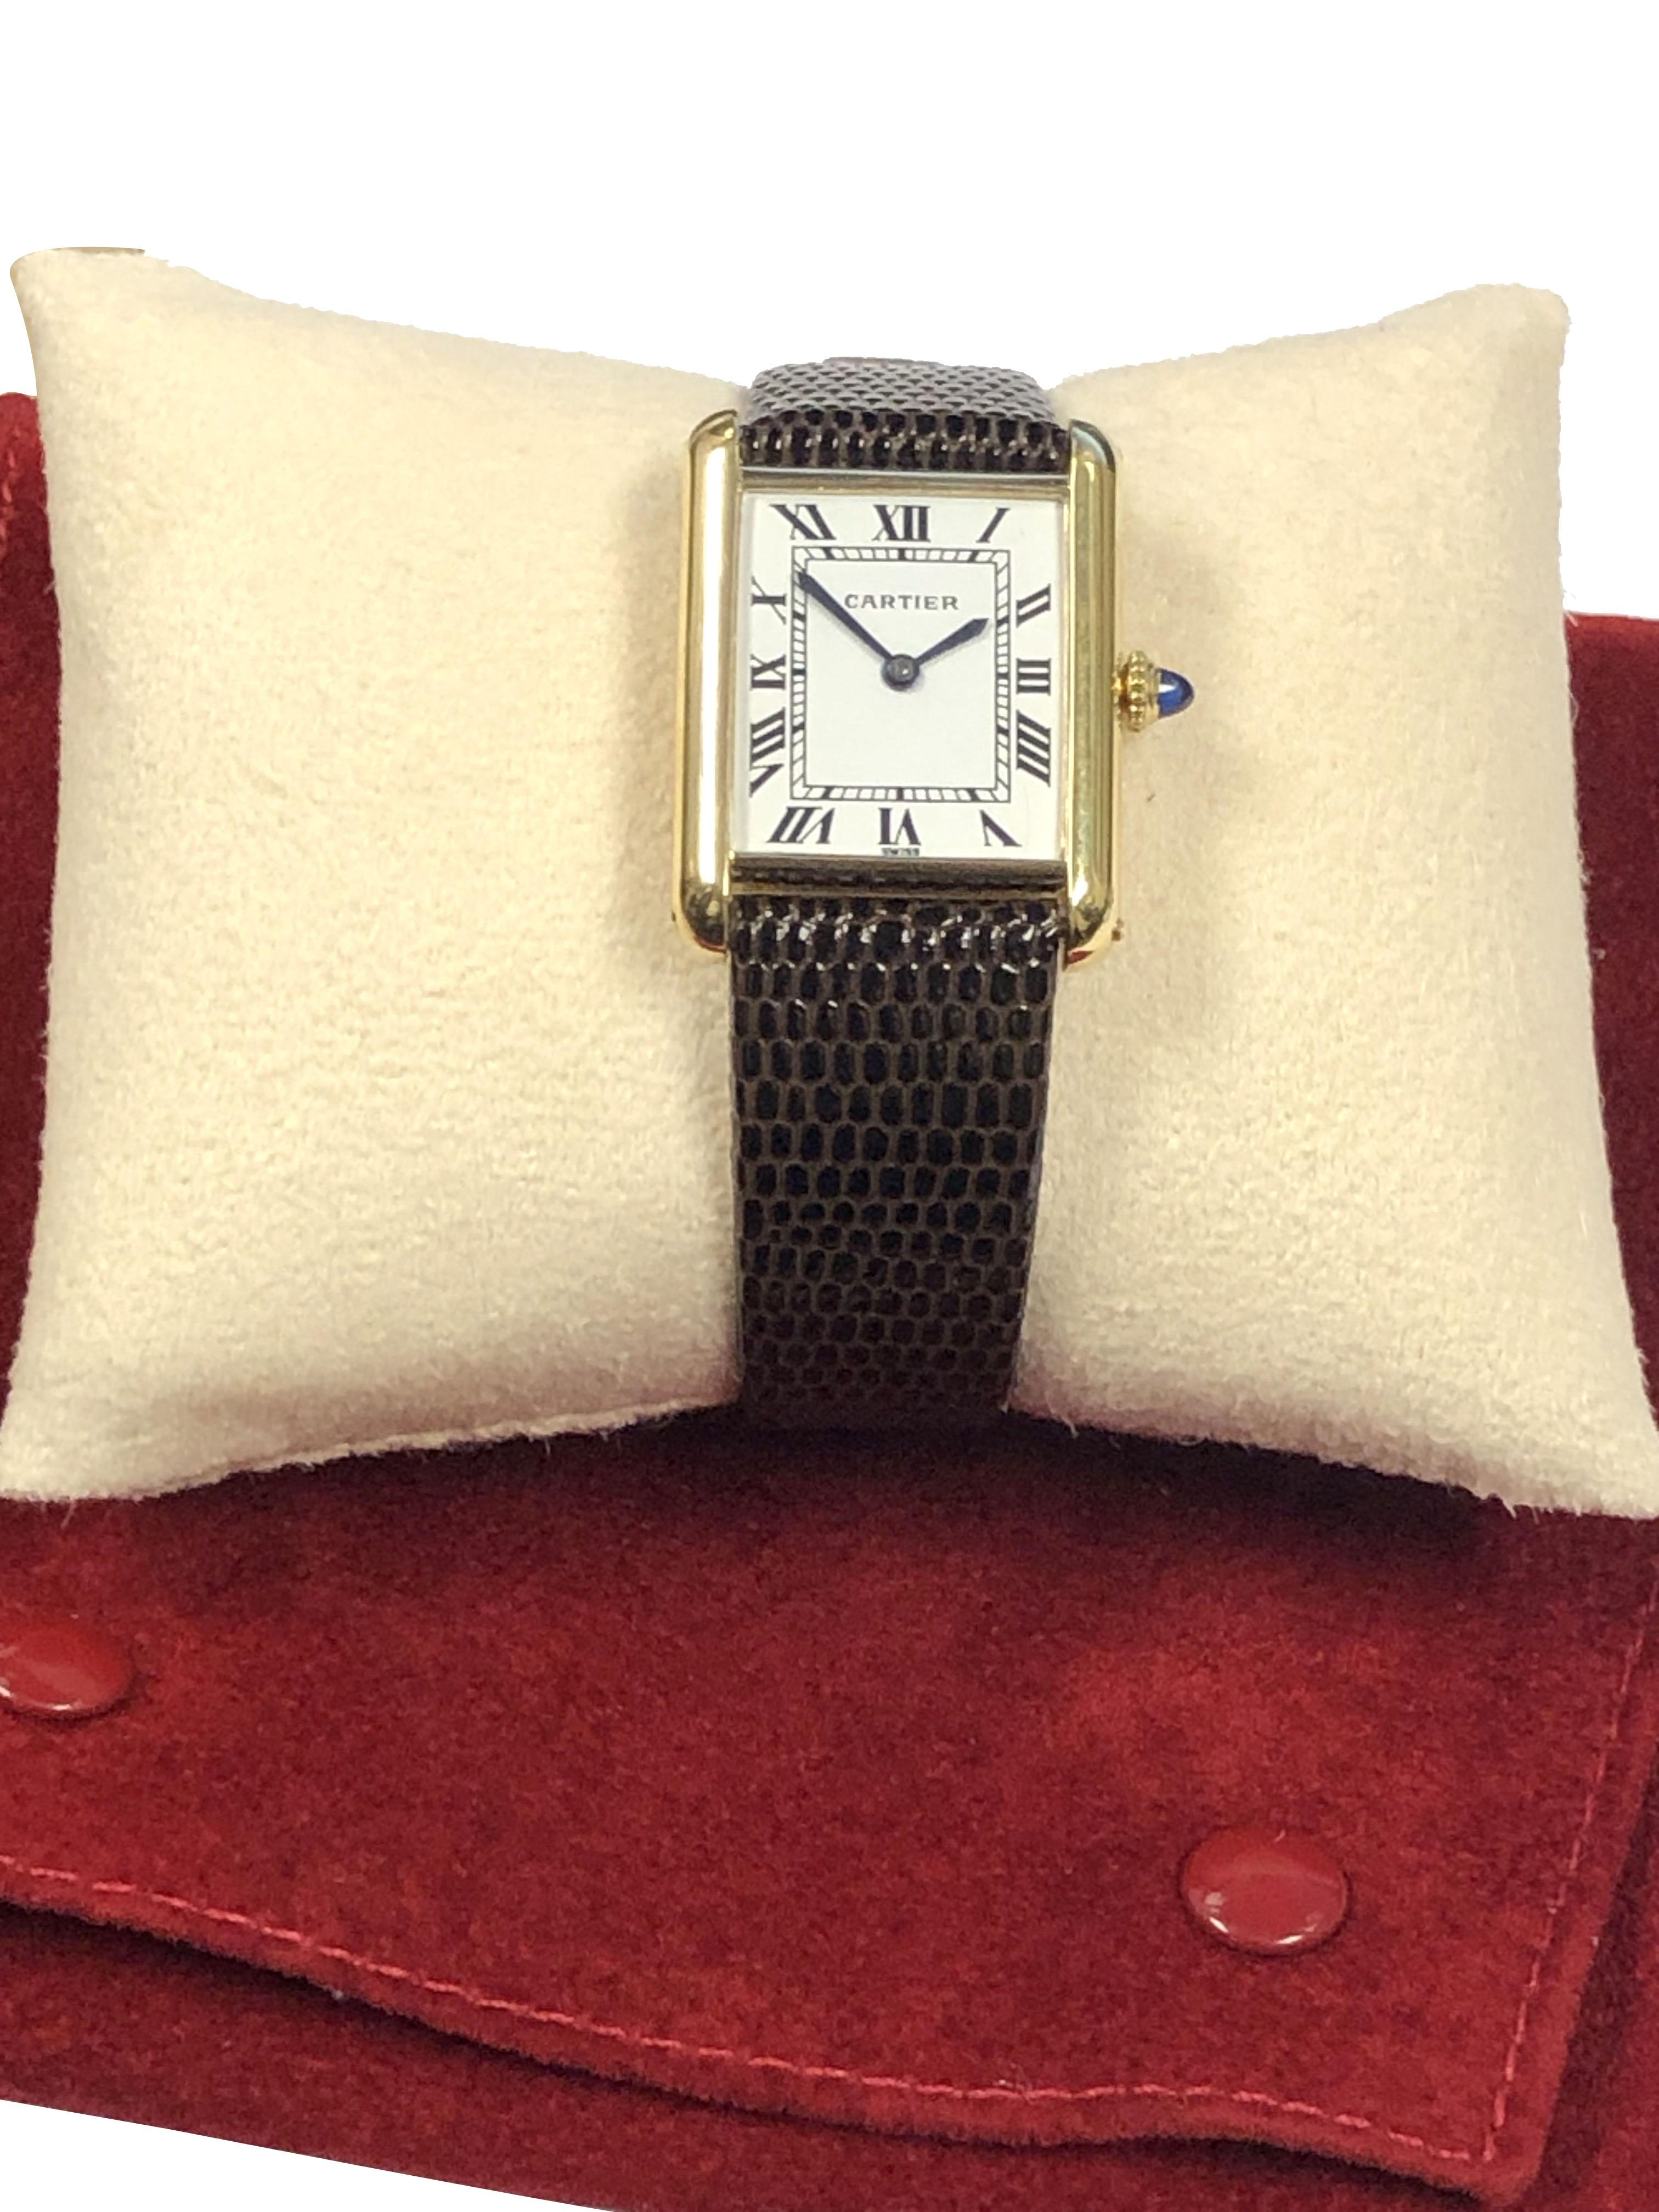 Cartier Vintage Yellow Gold Iconic Tank Mechanical Wrist Watch For Sale 4